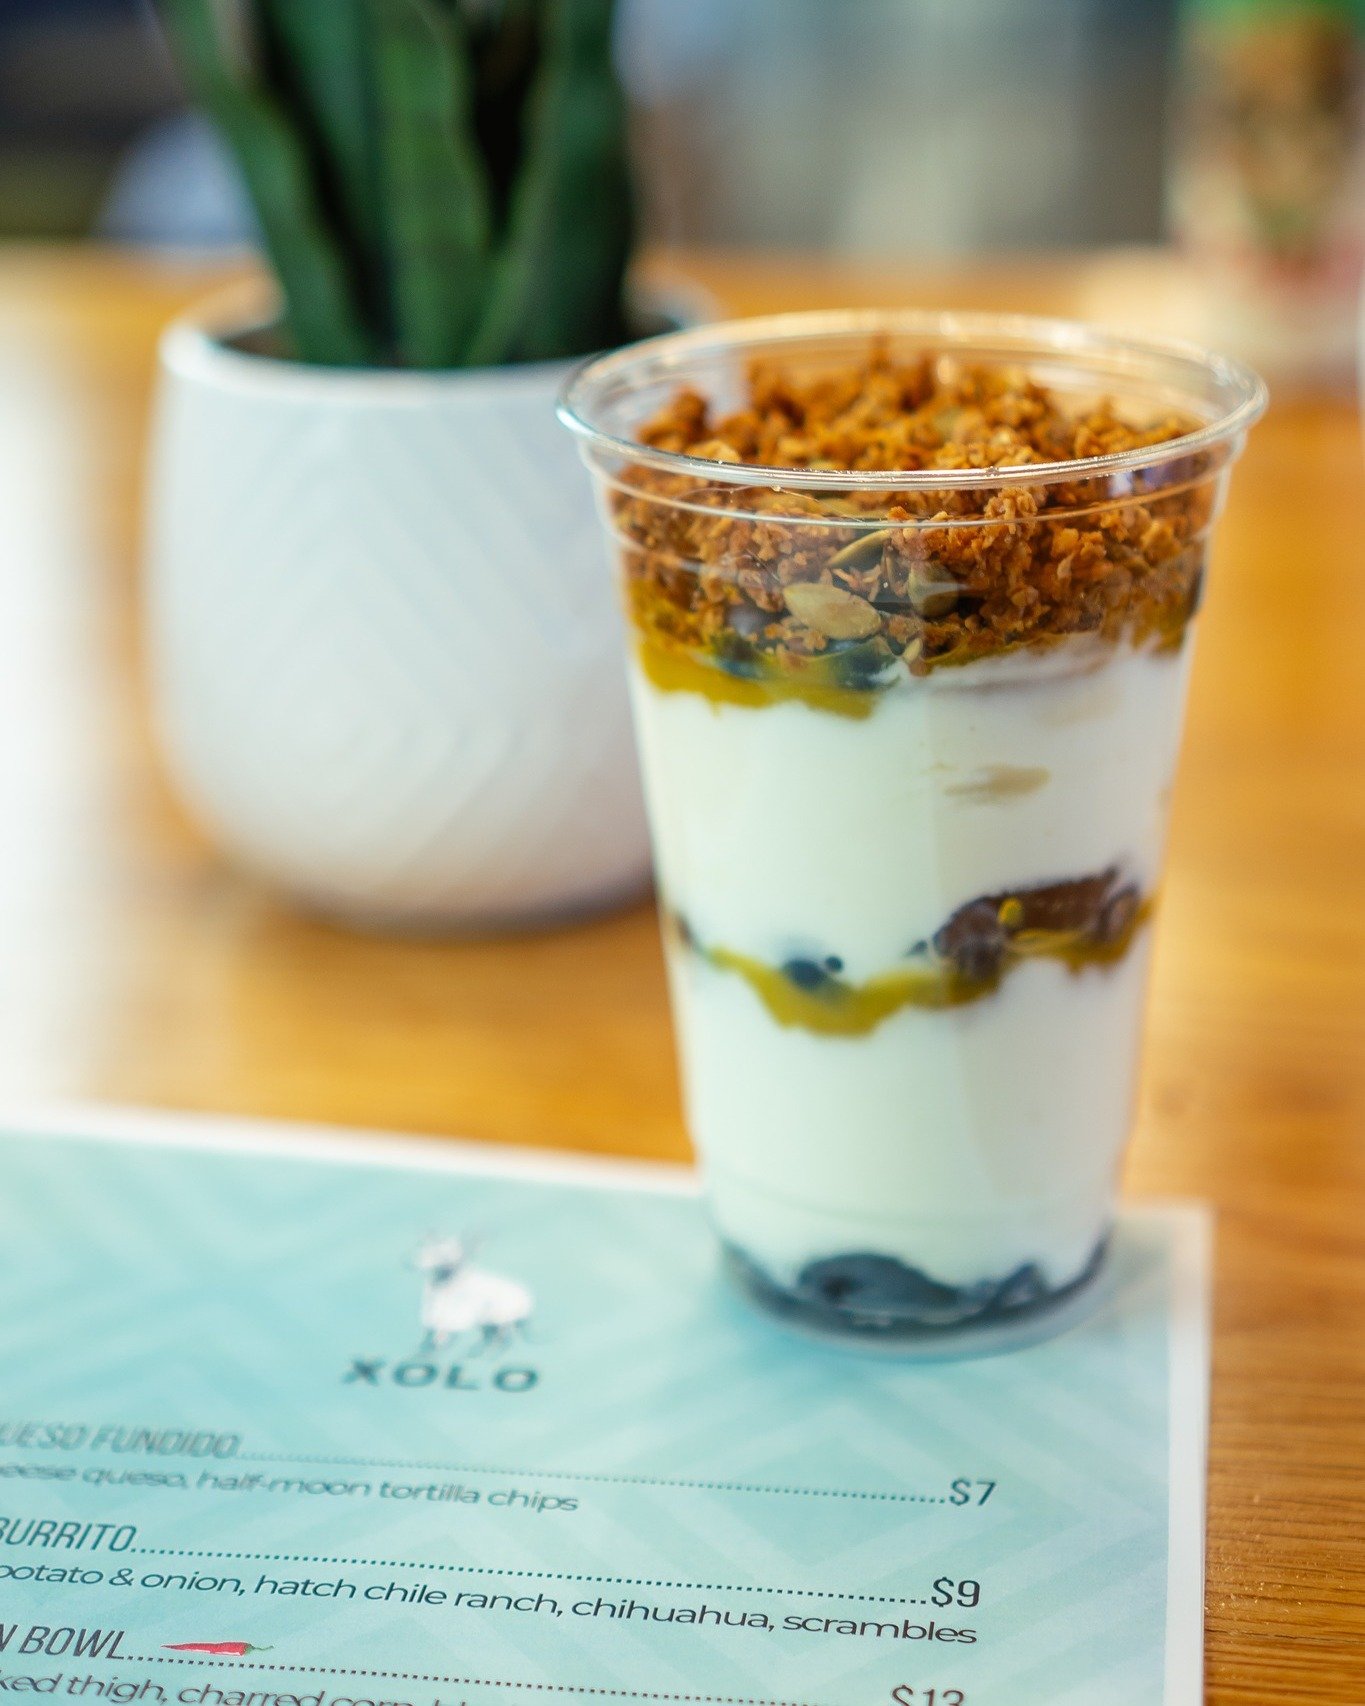 ... And Maybe A Spoon? 🫐🍍 Breakfast before work is important. That's why we have both sit-down + on-the-go options. Grab a spoonful of delight with our heavenly creation: greek yogurt layered with pineapple, blueberry, mango coulis, agave, and Mexi